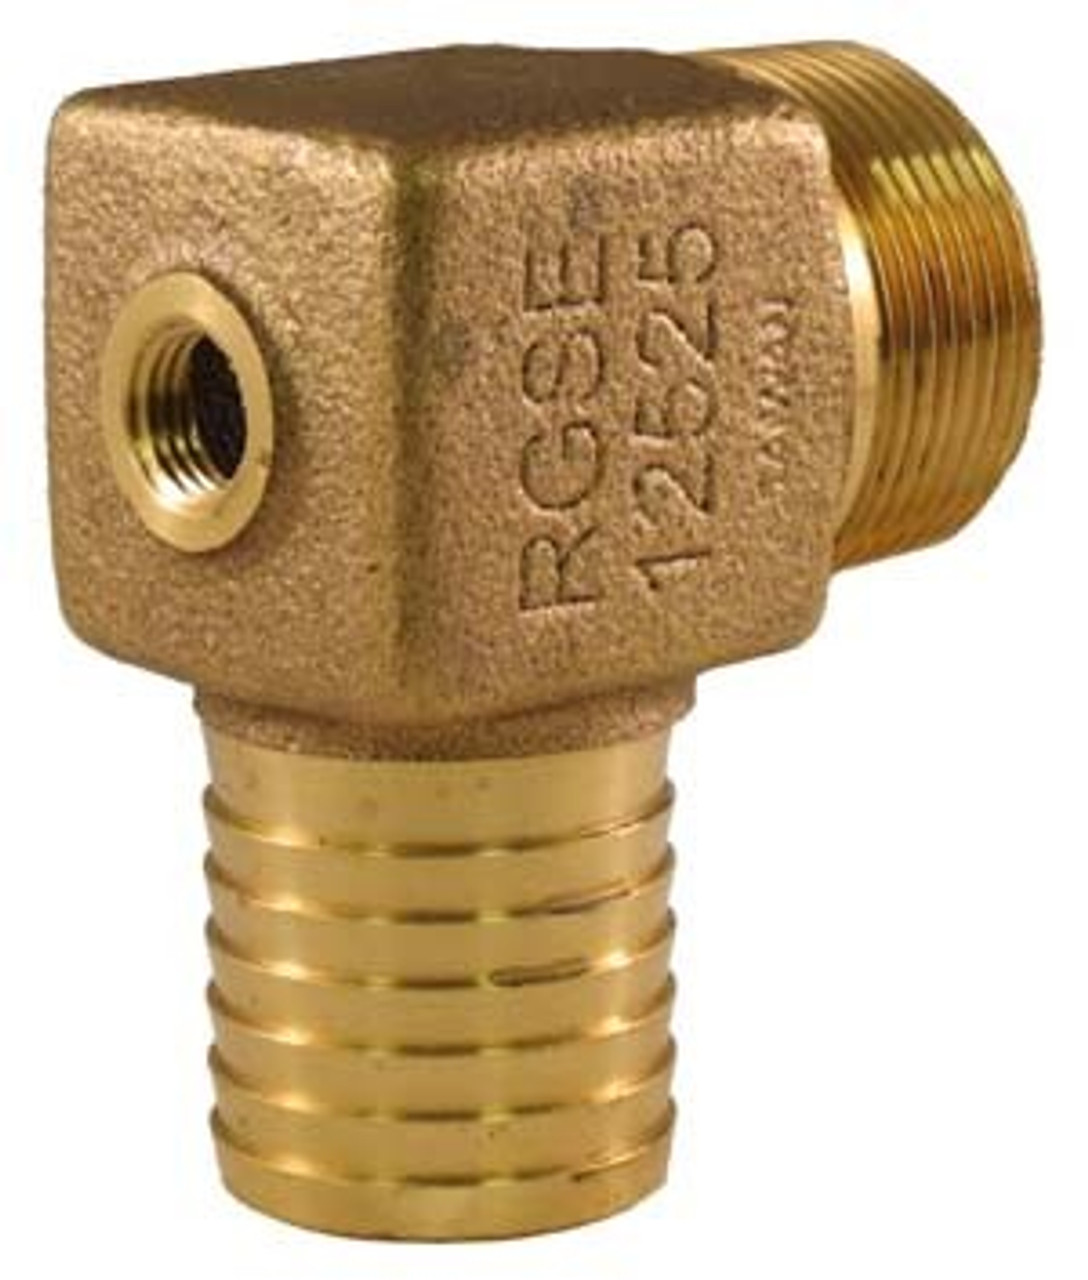 Brass Elbow 1¼ Male Pipe Thread x 1¼ Barb with ¼ Tap